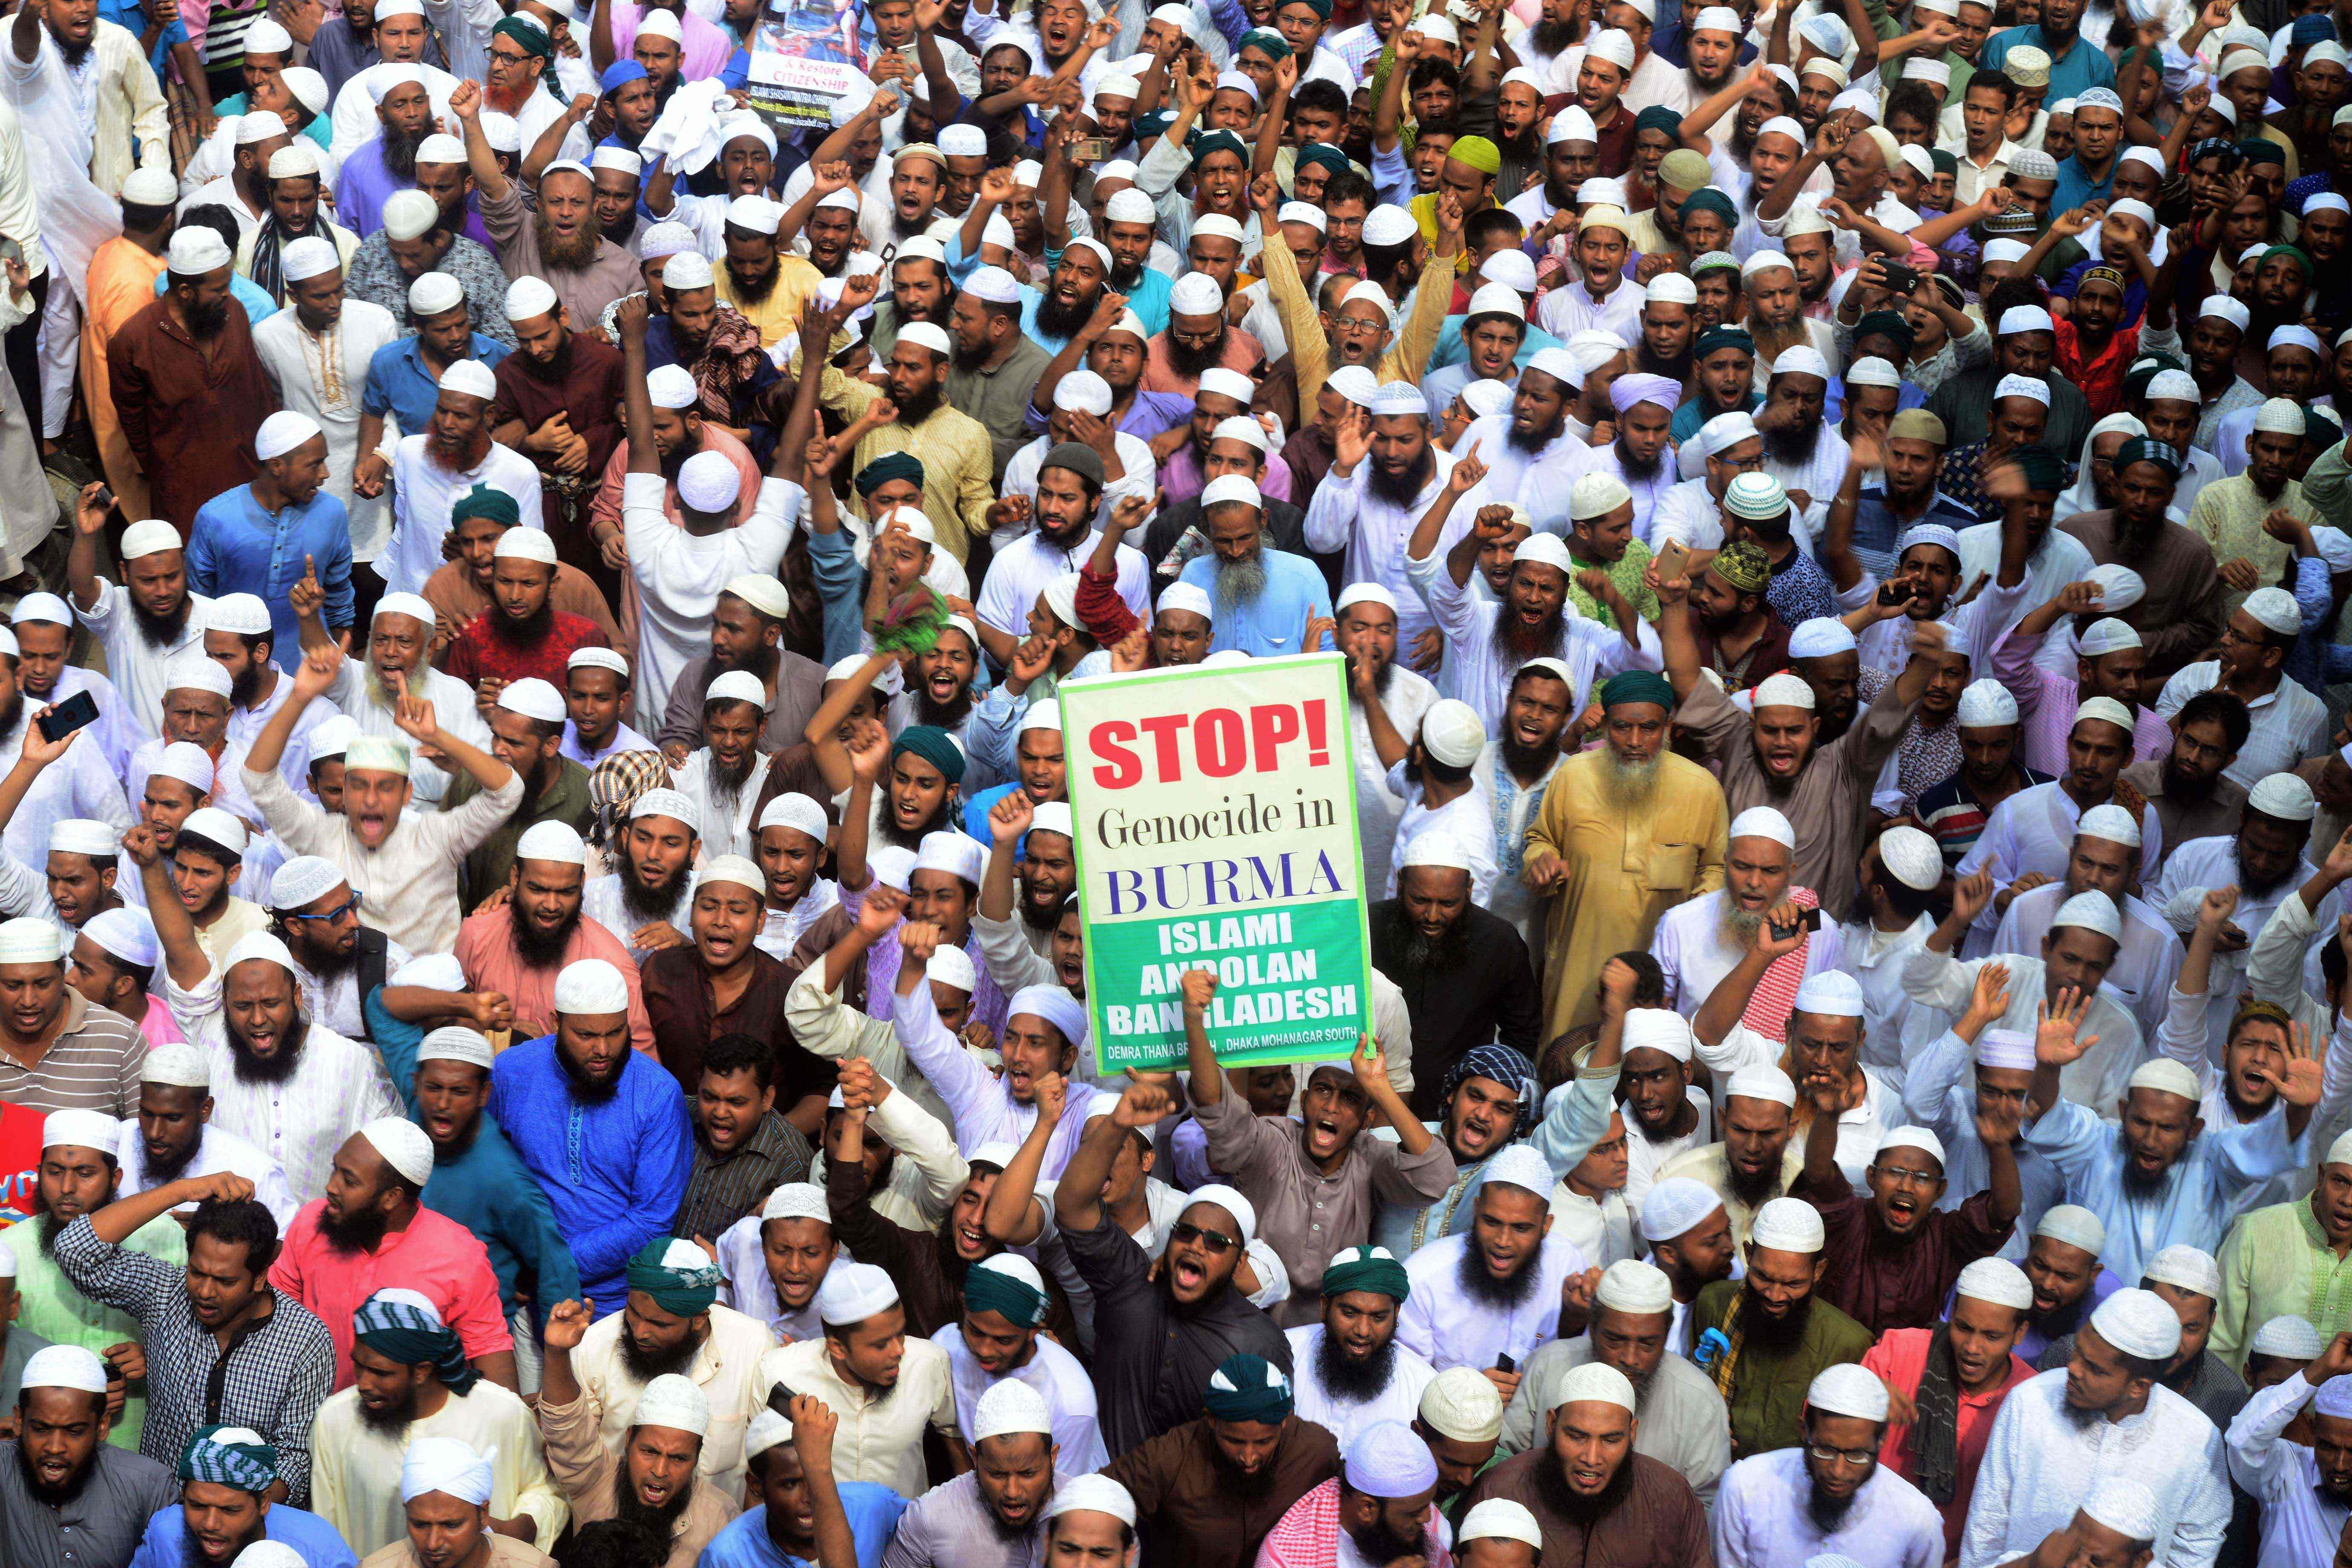 Members of an Islamist group shout slogans during a protest after Friday prayers in Dhaka, the capital of Bangladesh, over the violence against Rohingya Muslims in Myanmar. Photo: AFP